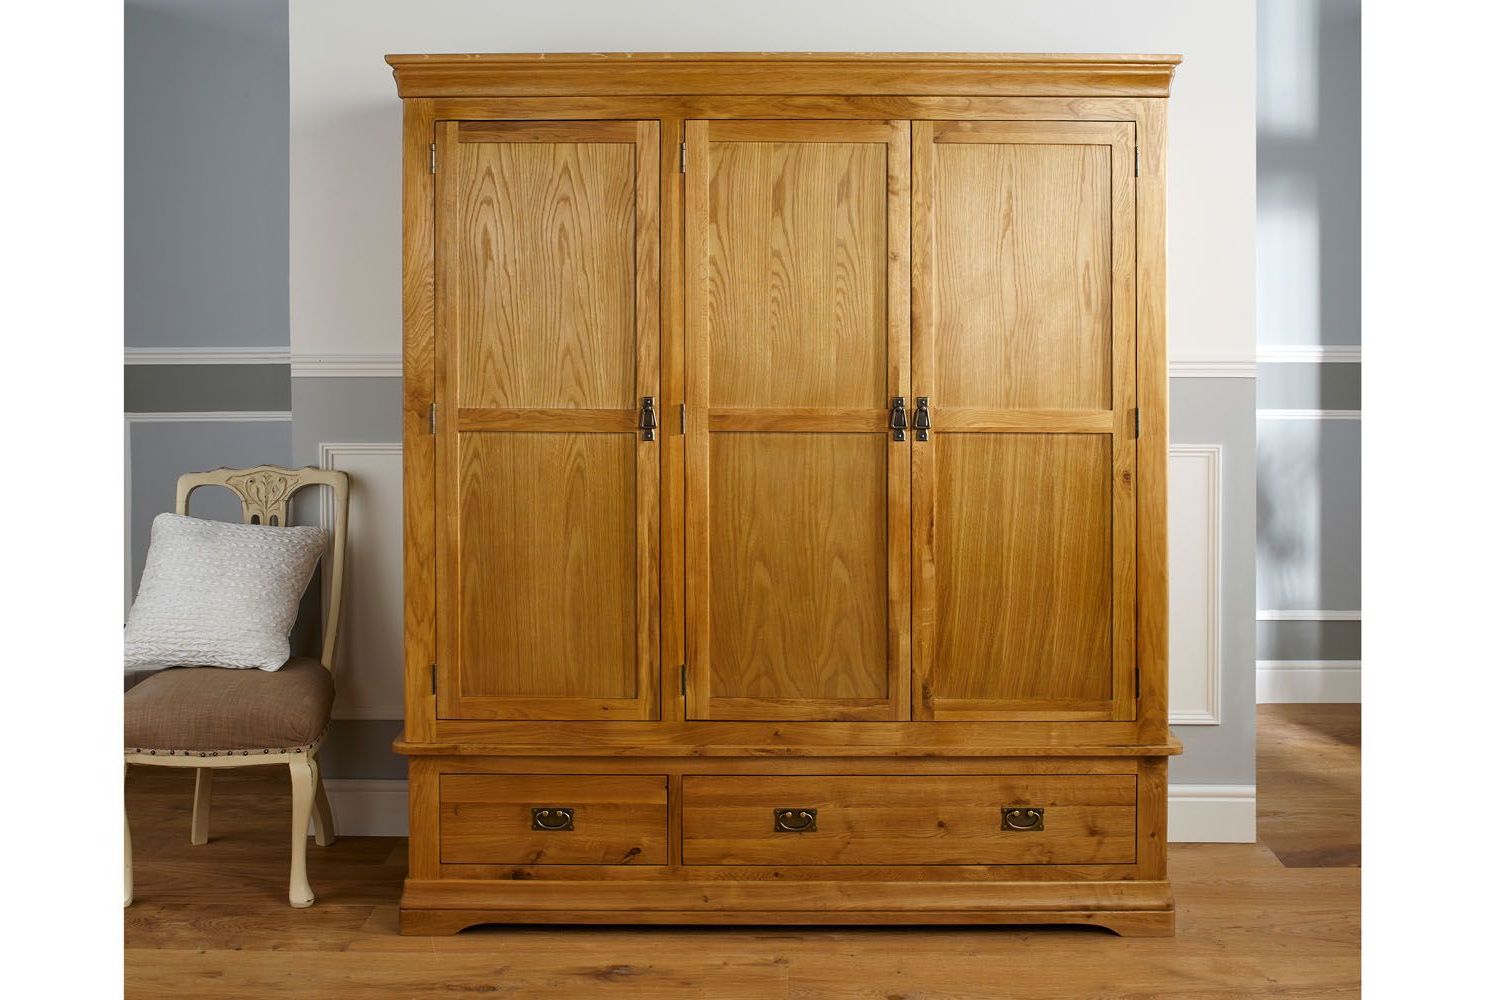 French Farmhouse Large Triple Oak Wardrobe – Free Delivery | Top Furniture With Large Oak Wardrobes (Gallery 4 of 20)